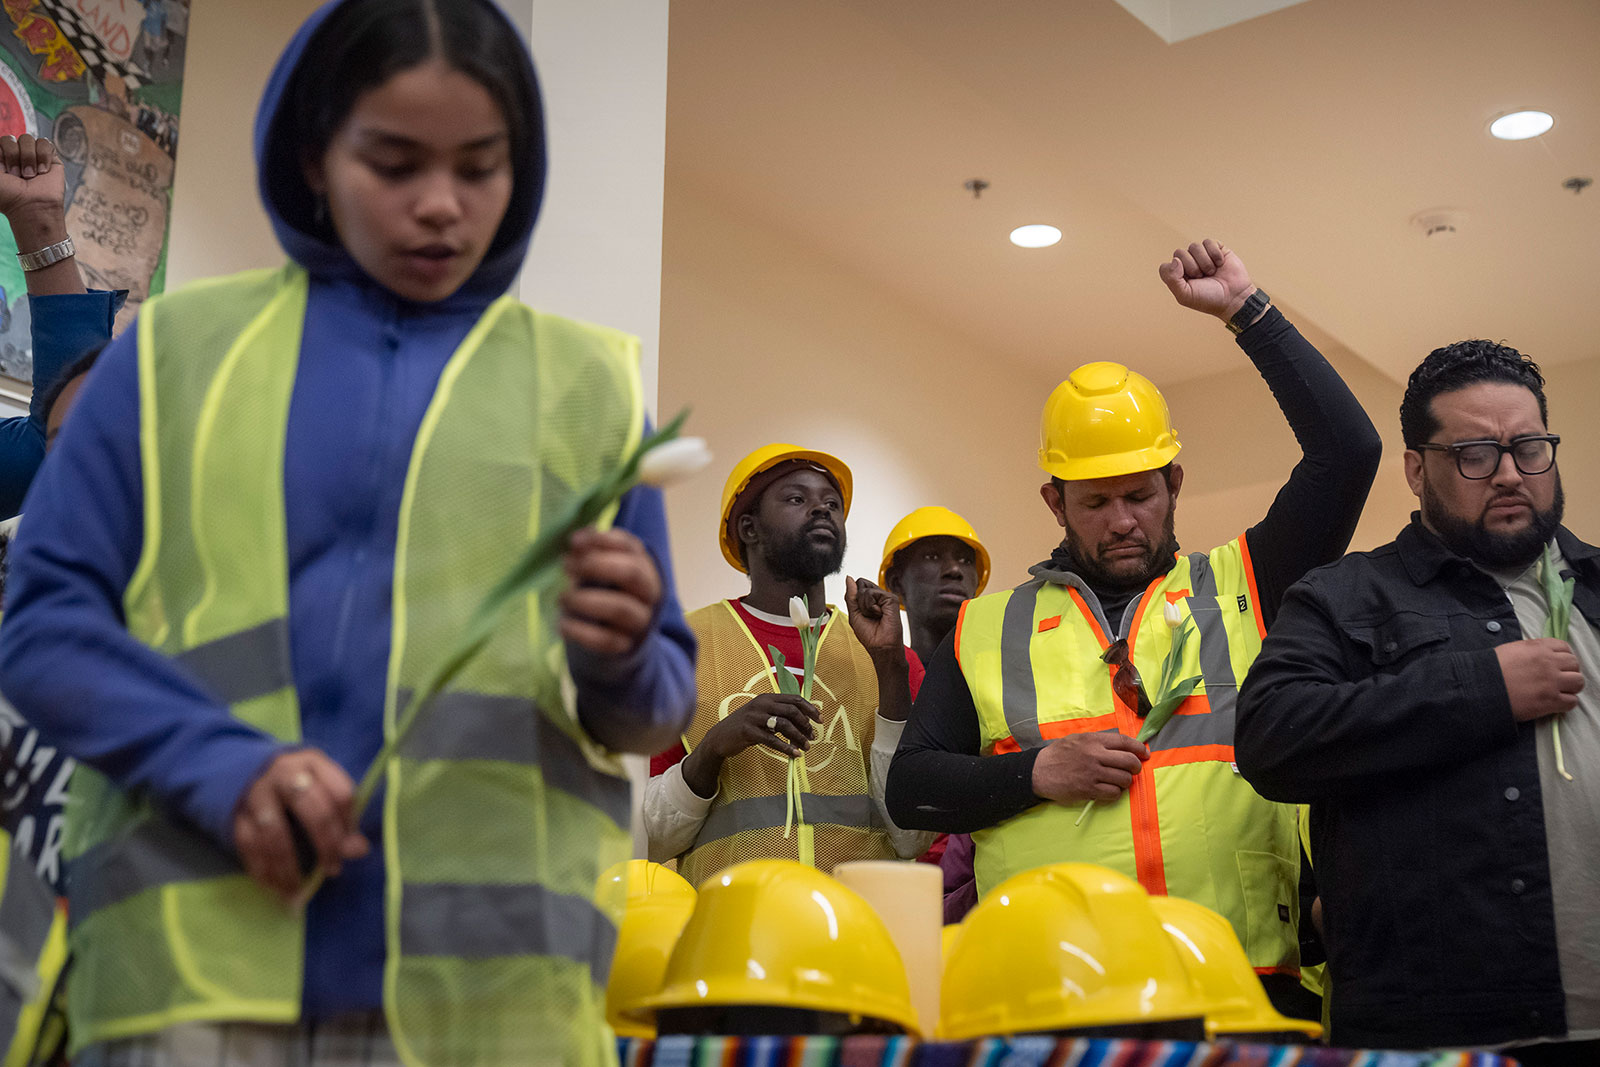 Construction workers and supporters reflect during a moment of prayer at a vigil and press conference by CASA of Maryland on Friday in Baltimore.